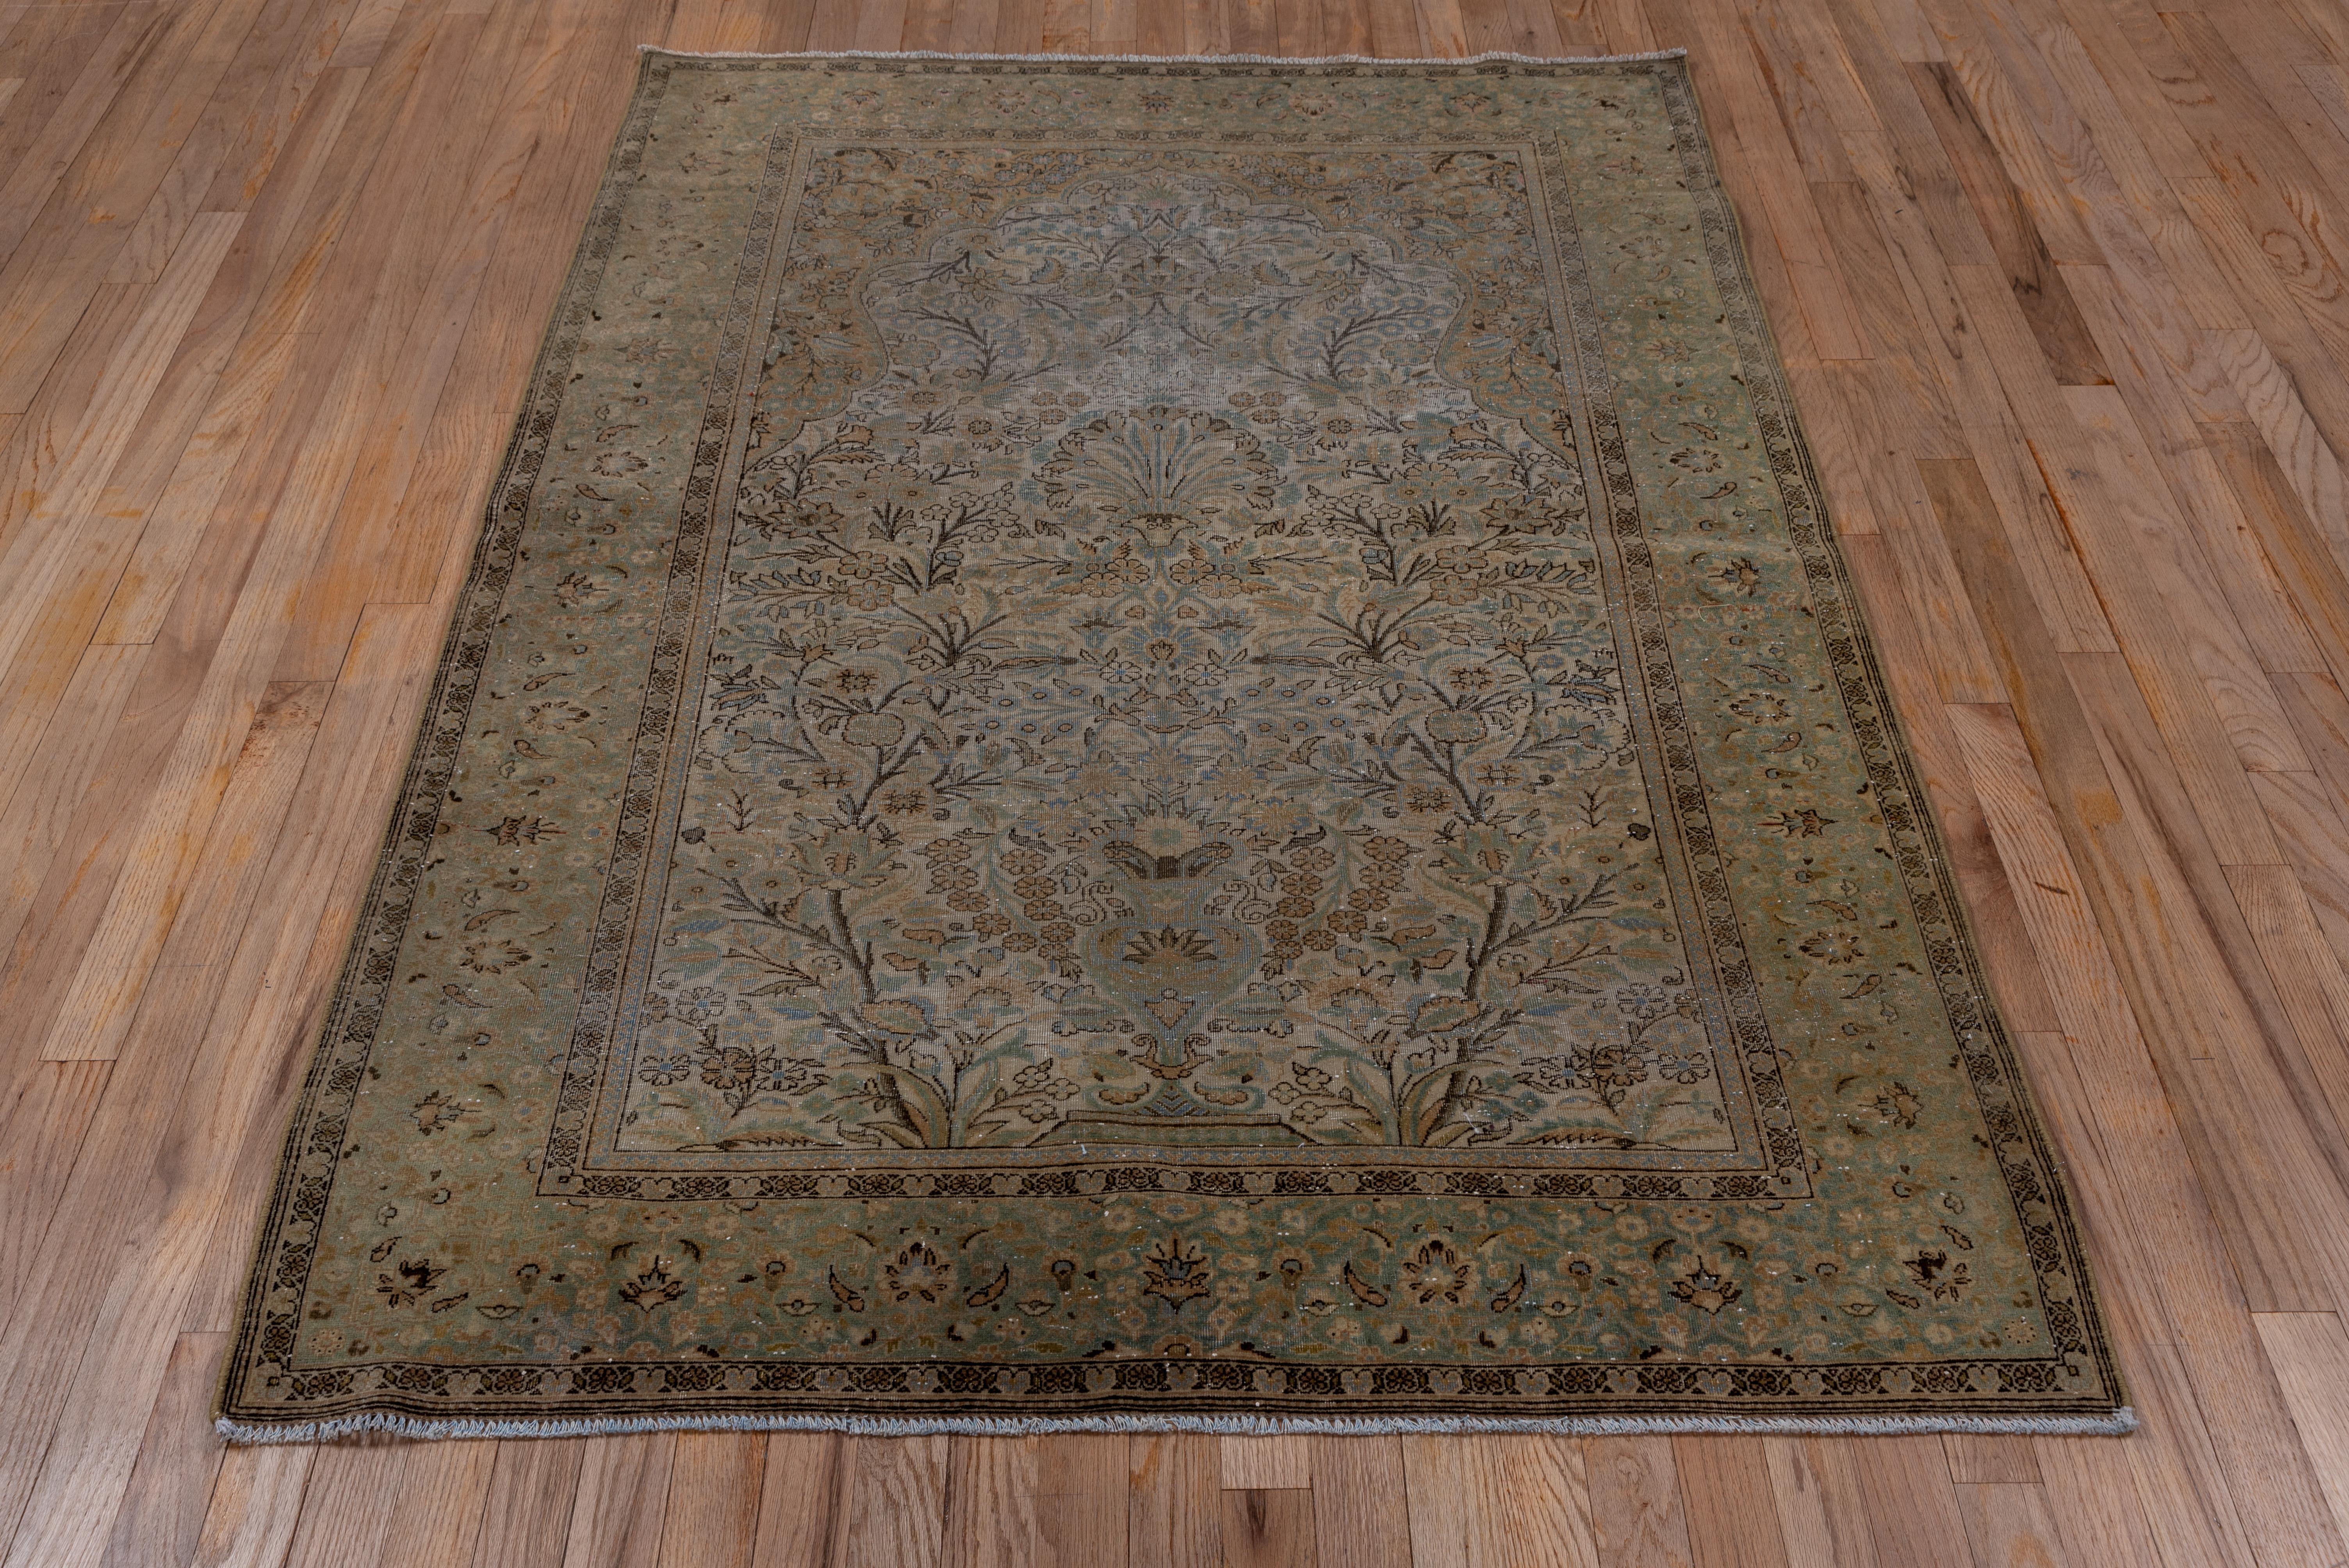 Fine Antique Persian Kashan Scatter Rugs with Earth Tones, Blues & Greens In Good Condition For Sale In New York, NY